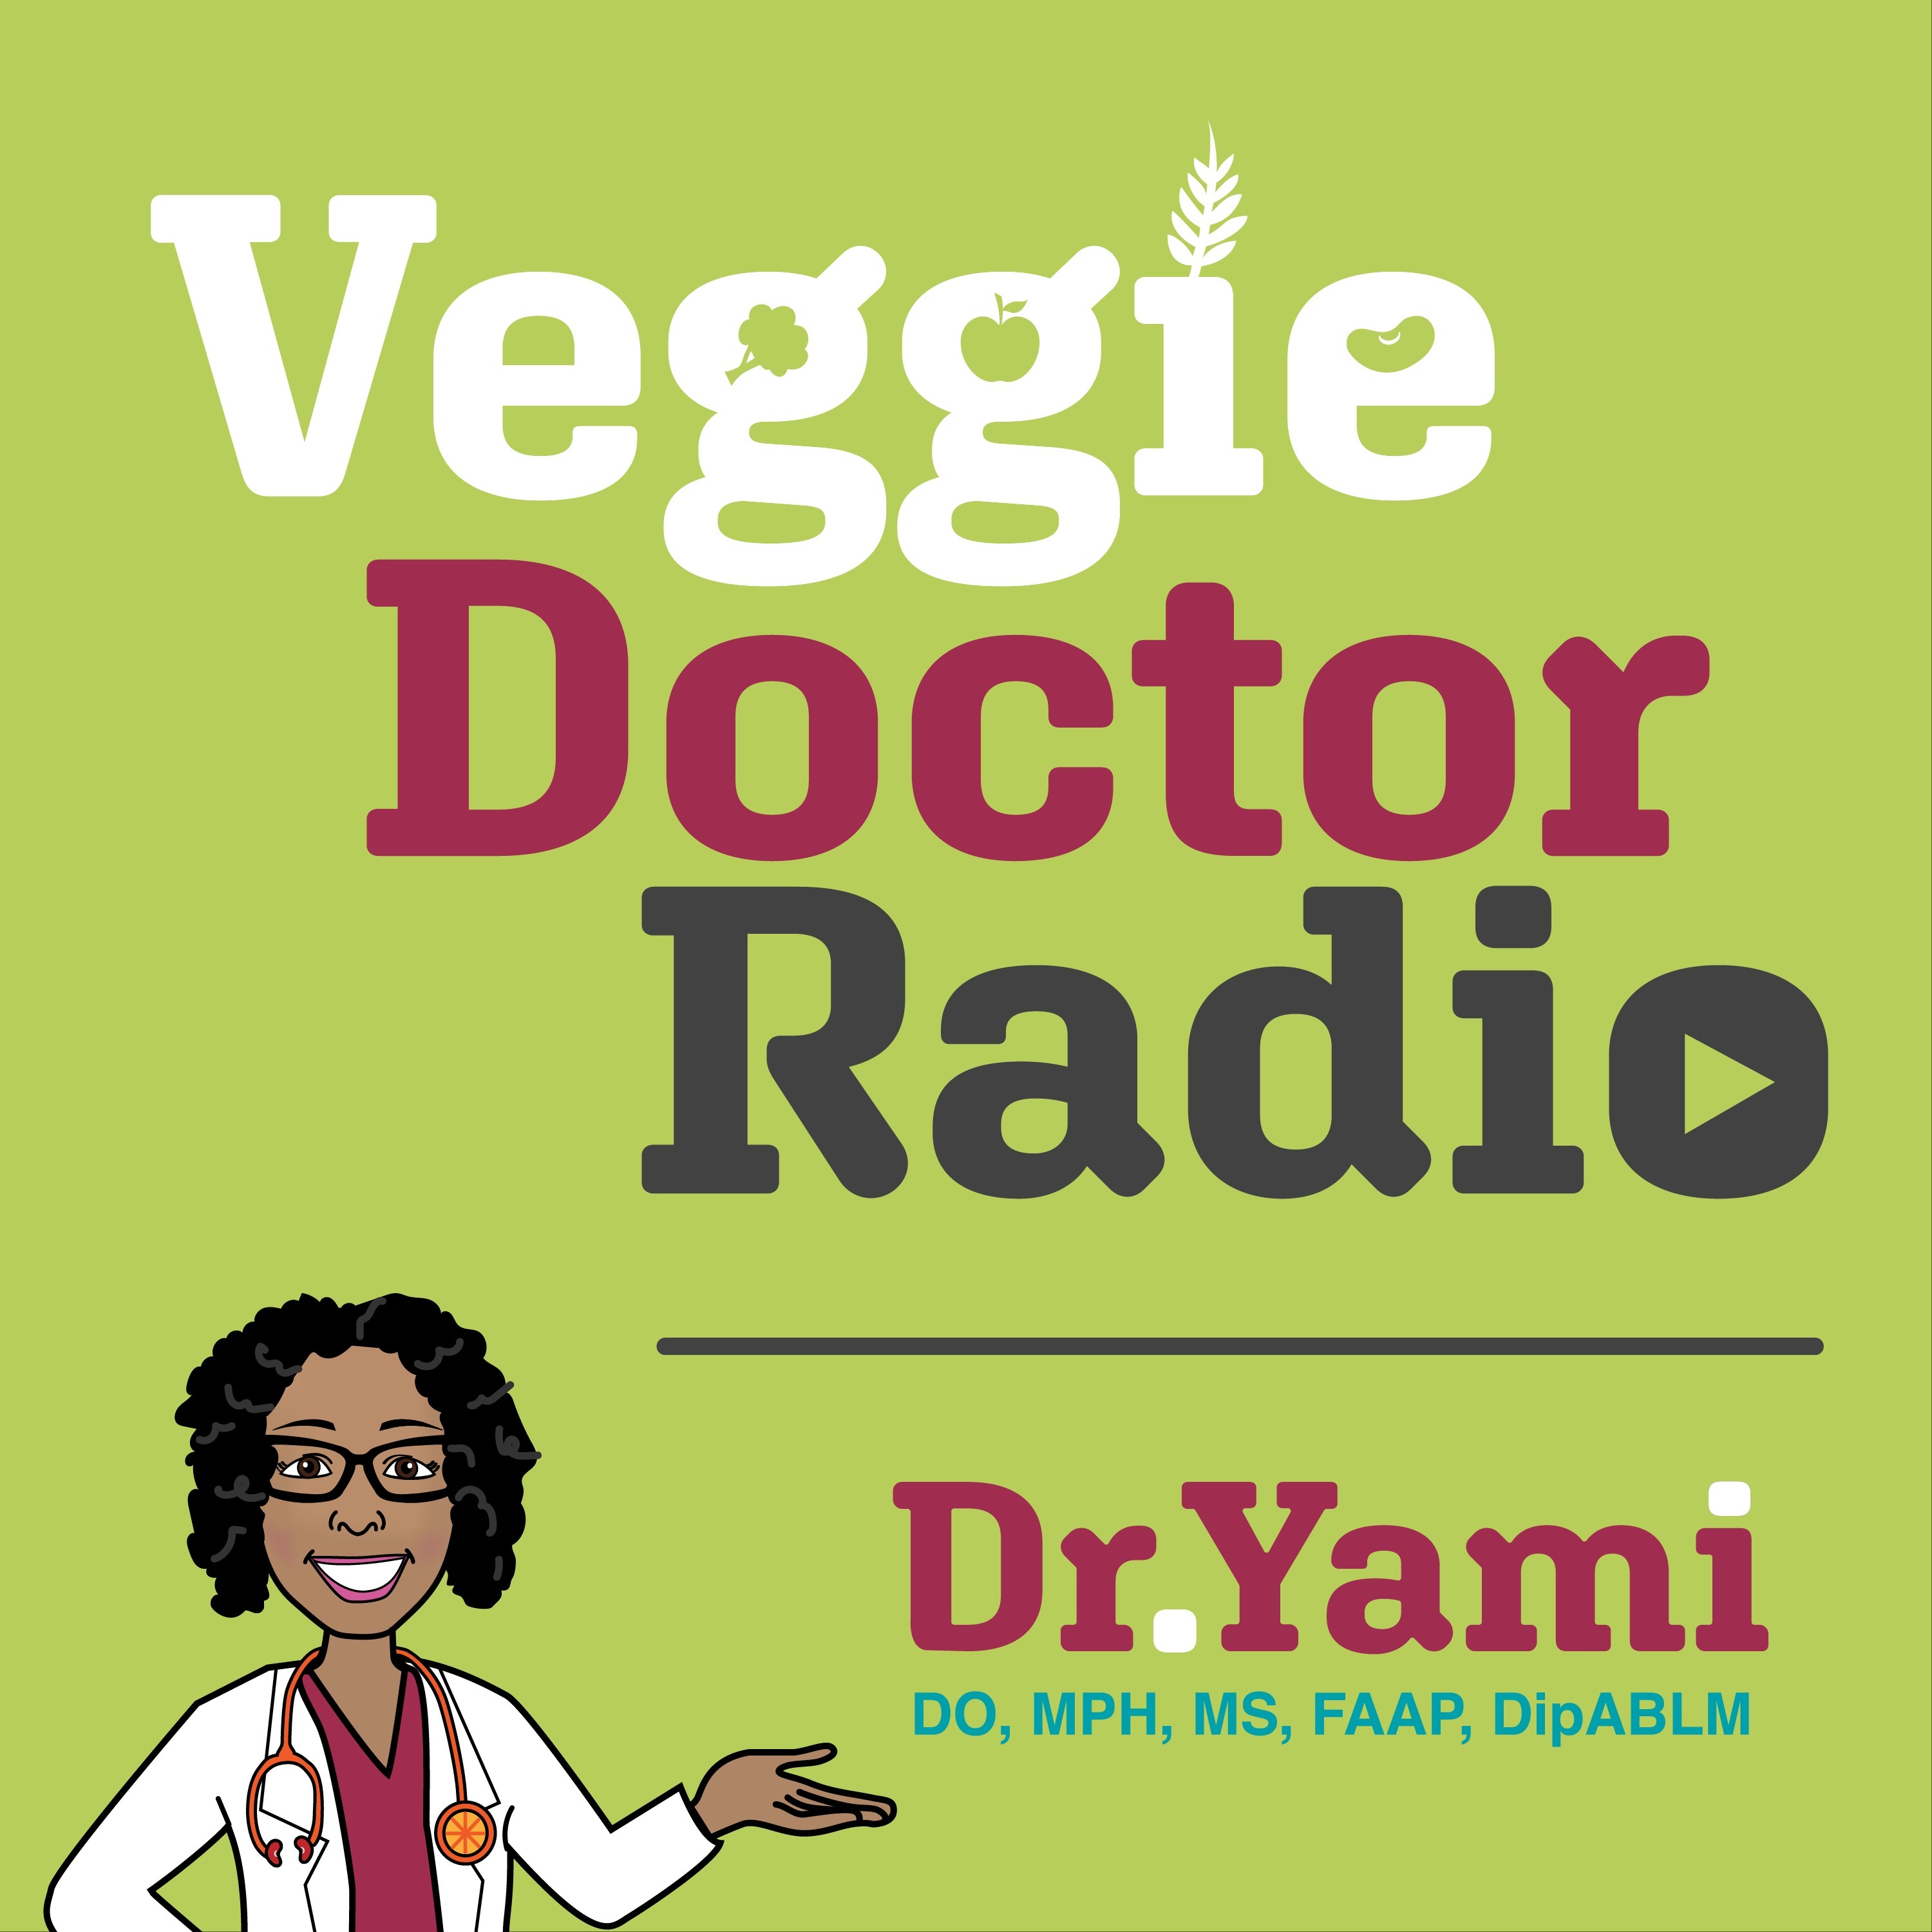 290: Dr. Monique May wants you to Fix Your Plate (Veggie Doctor Radio)